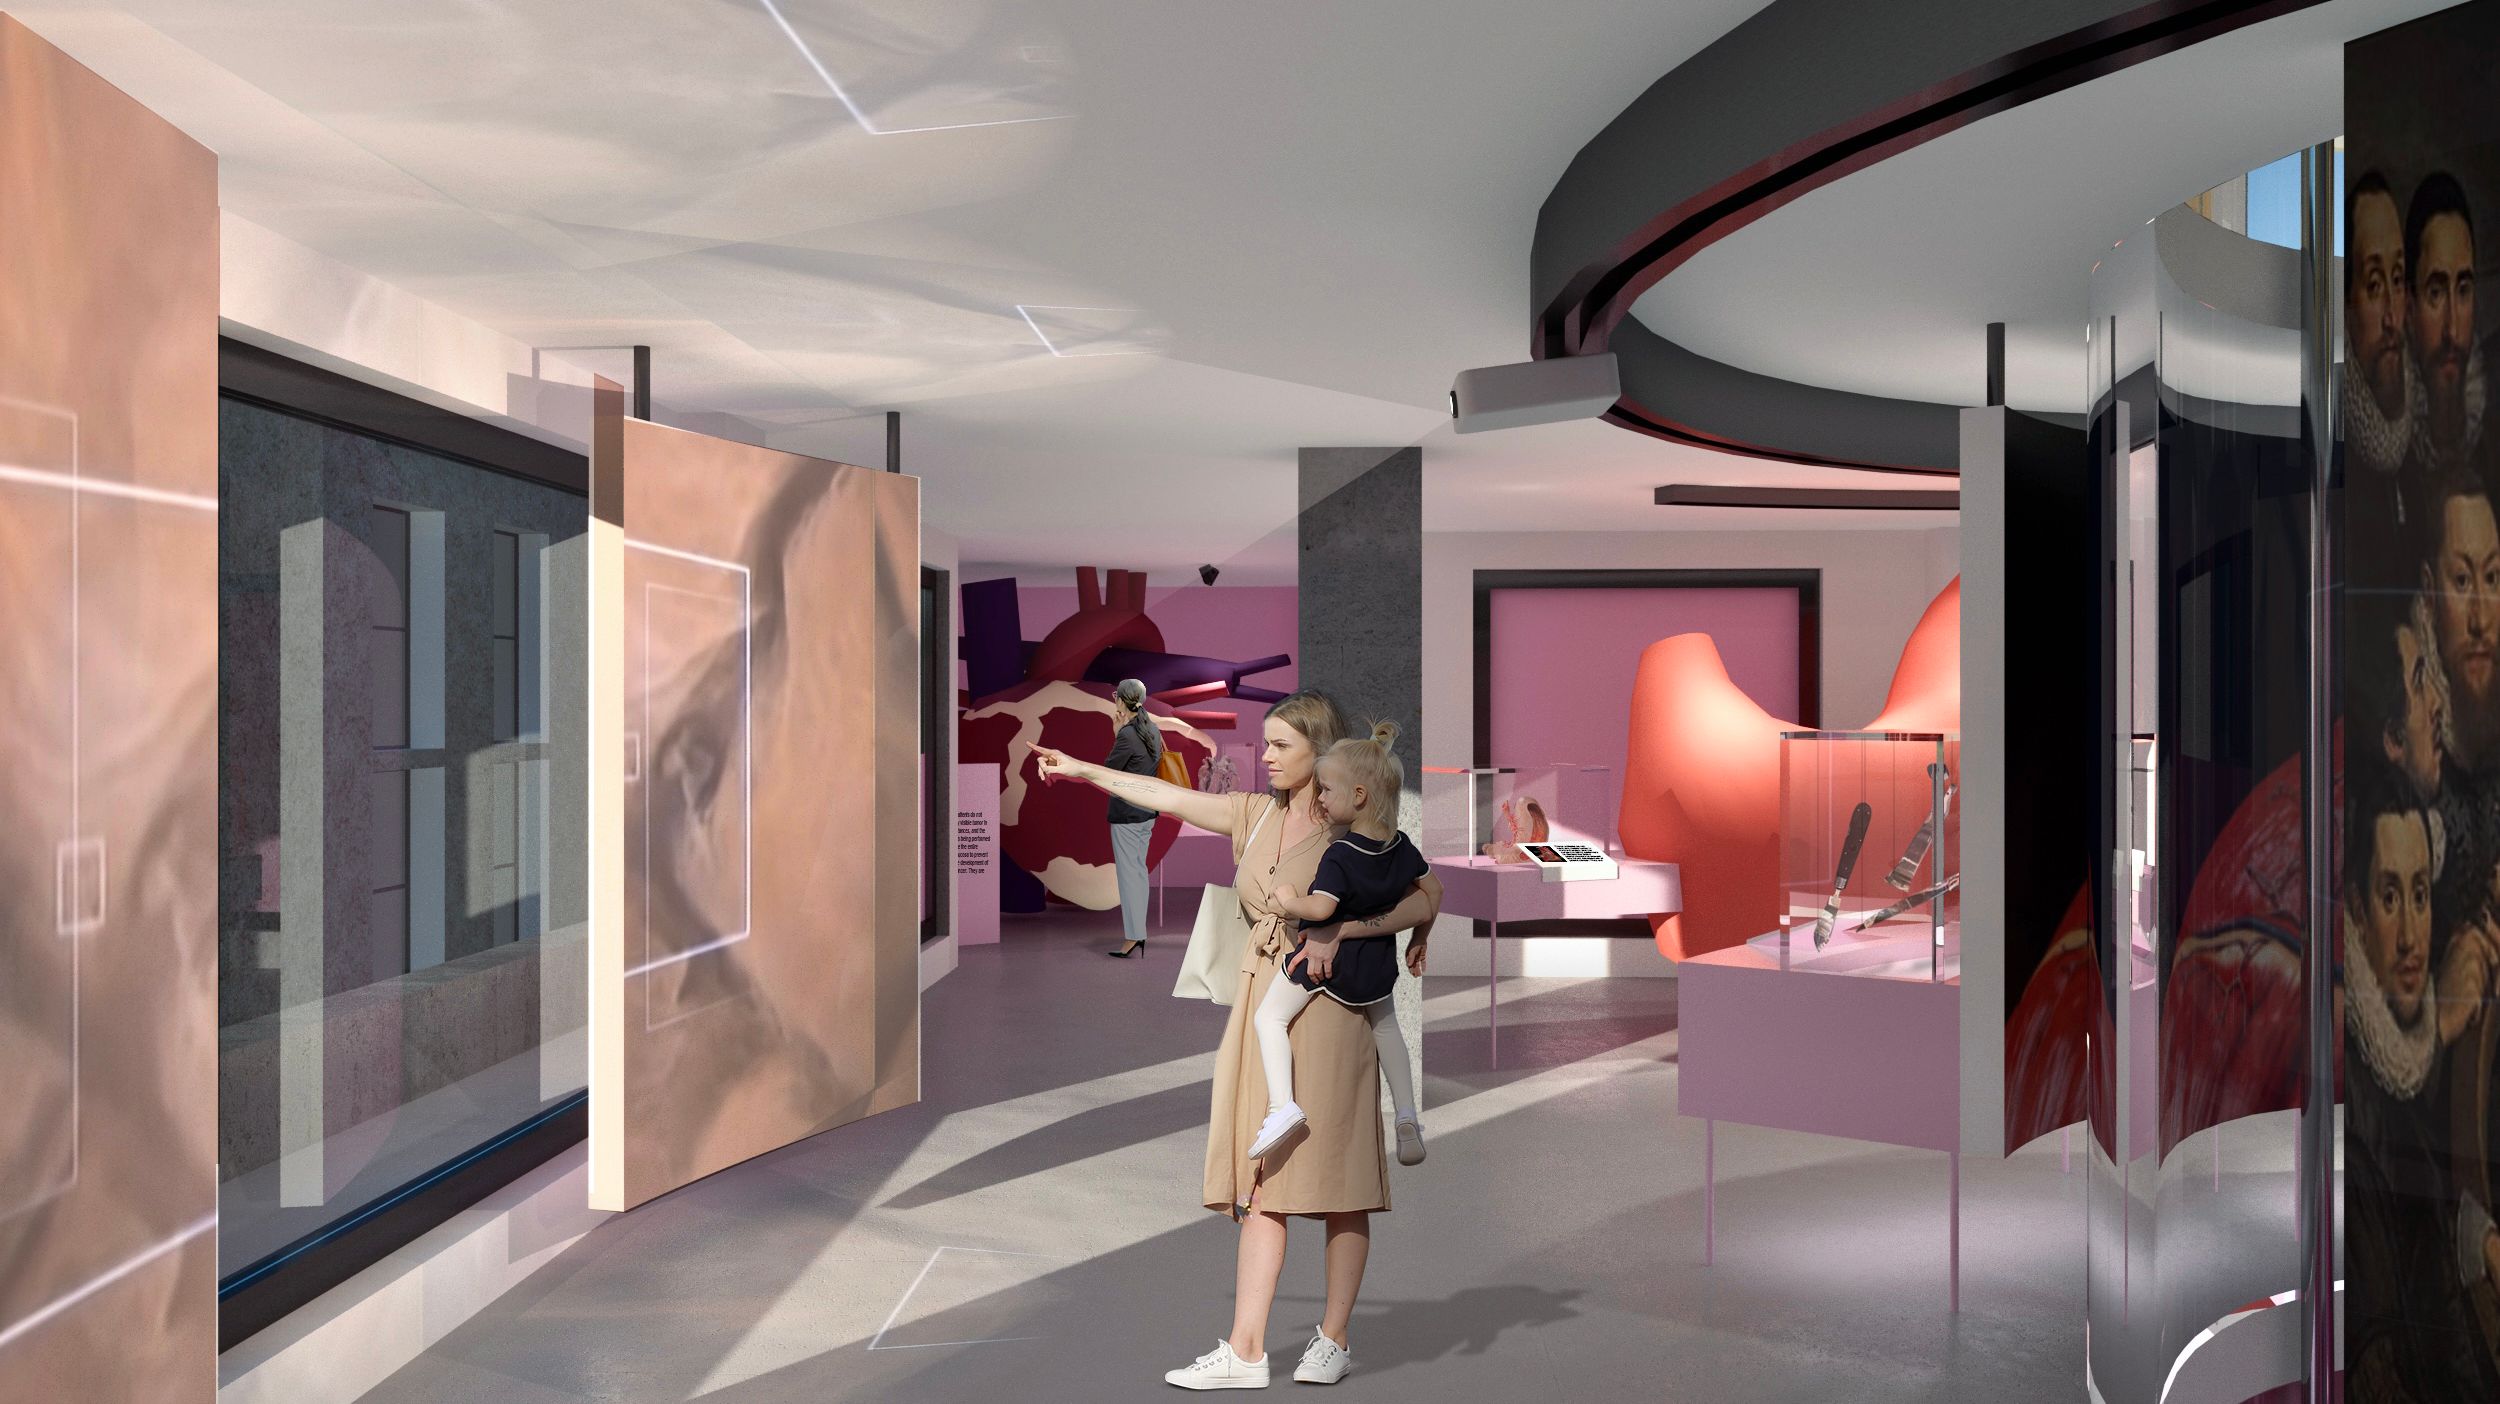 A mockup style image of a museum-type space with a woman standing the centre, pointing out something to a small child she holds, next to large curved image displays and covered display cabinets.